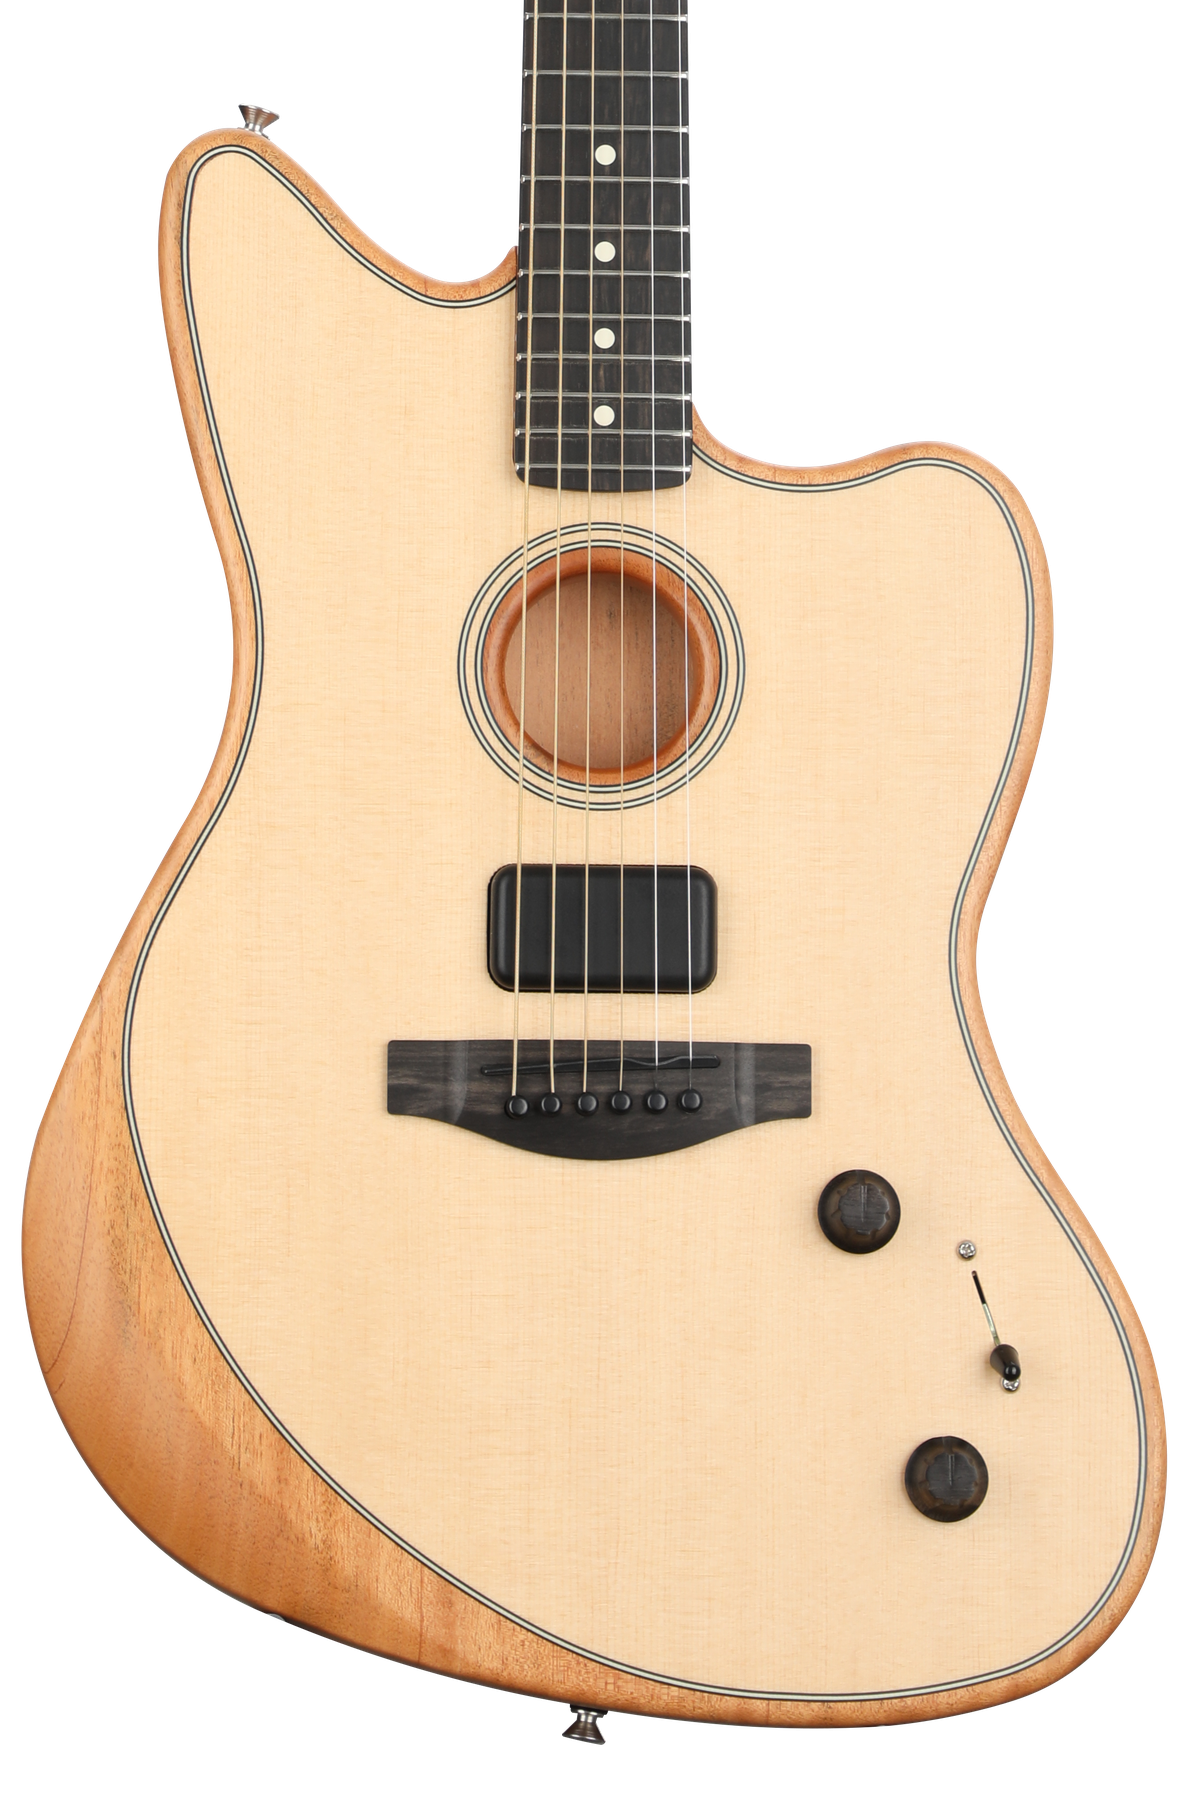 Fender American Acoustasonic Jazzmaster Acoustic-electric Guitar - Natural  | Sweetwater